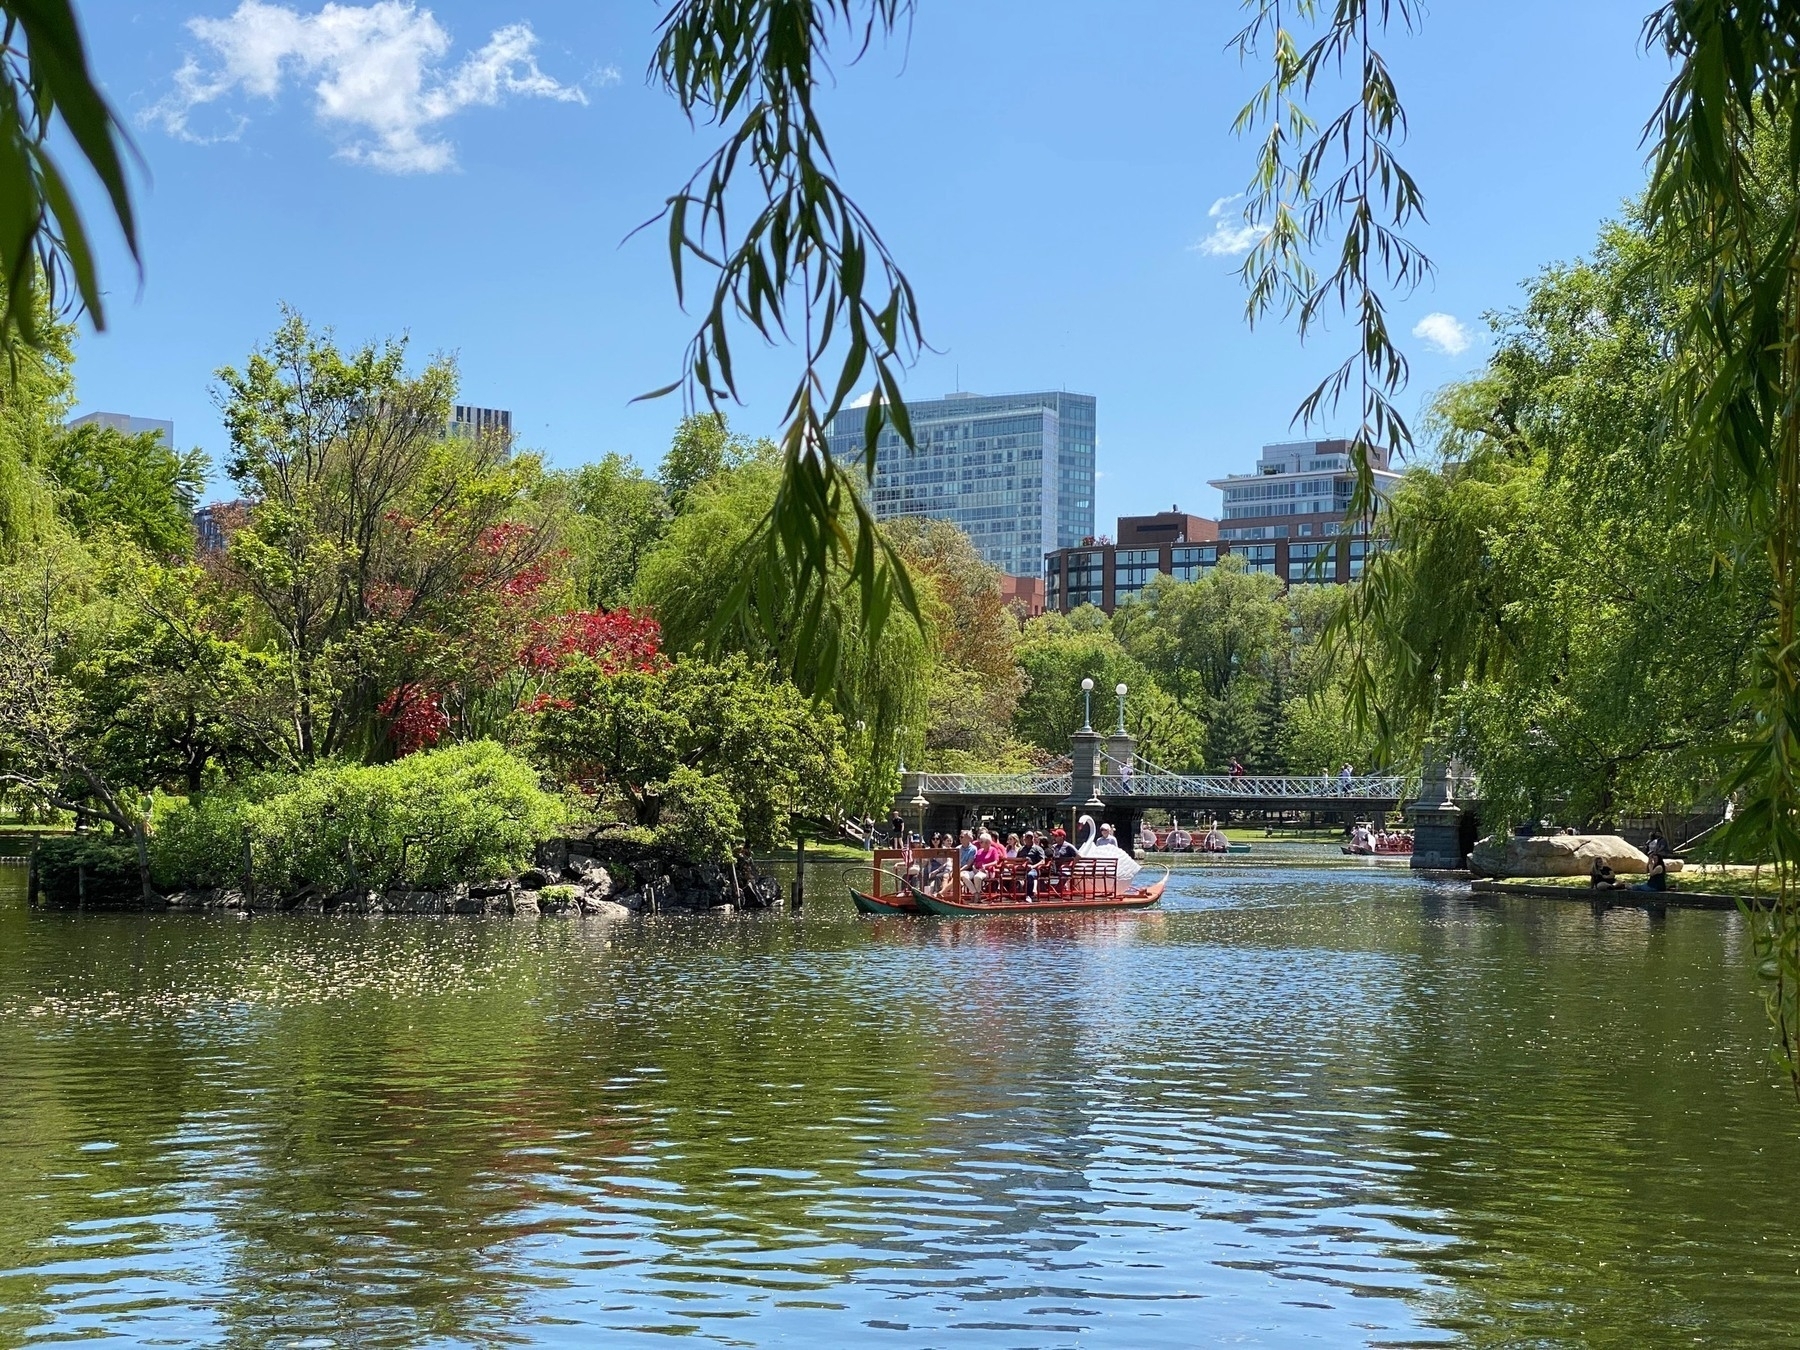 View of a swan boat on a pond in a city park, with blue sky above and green trees all around.